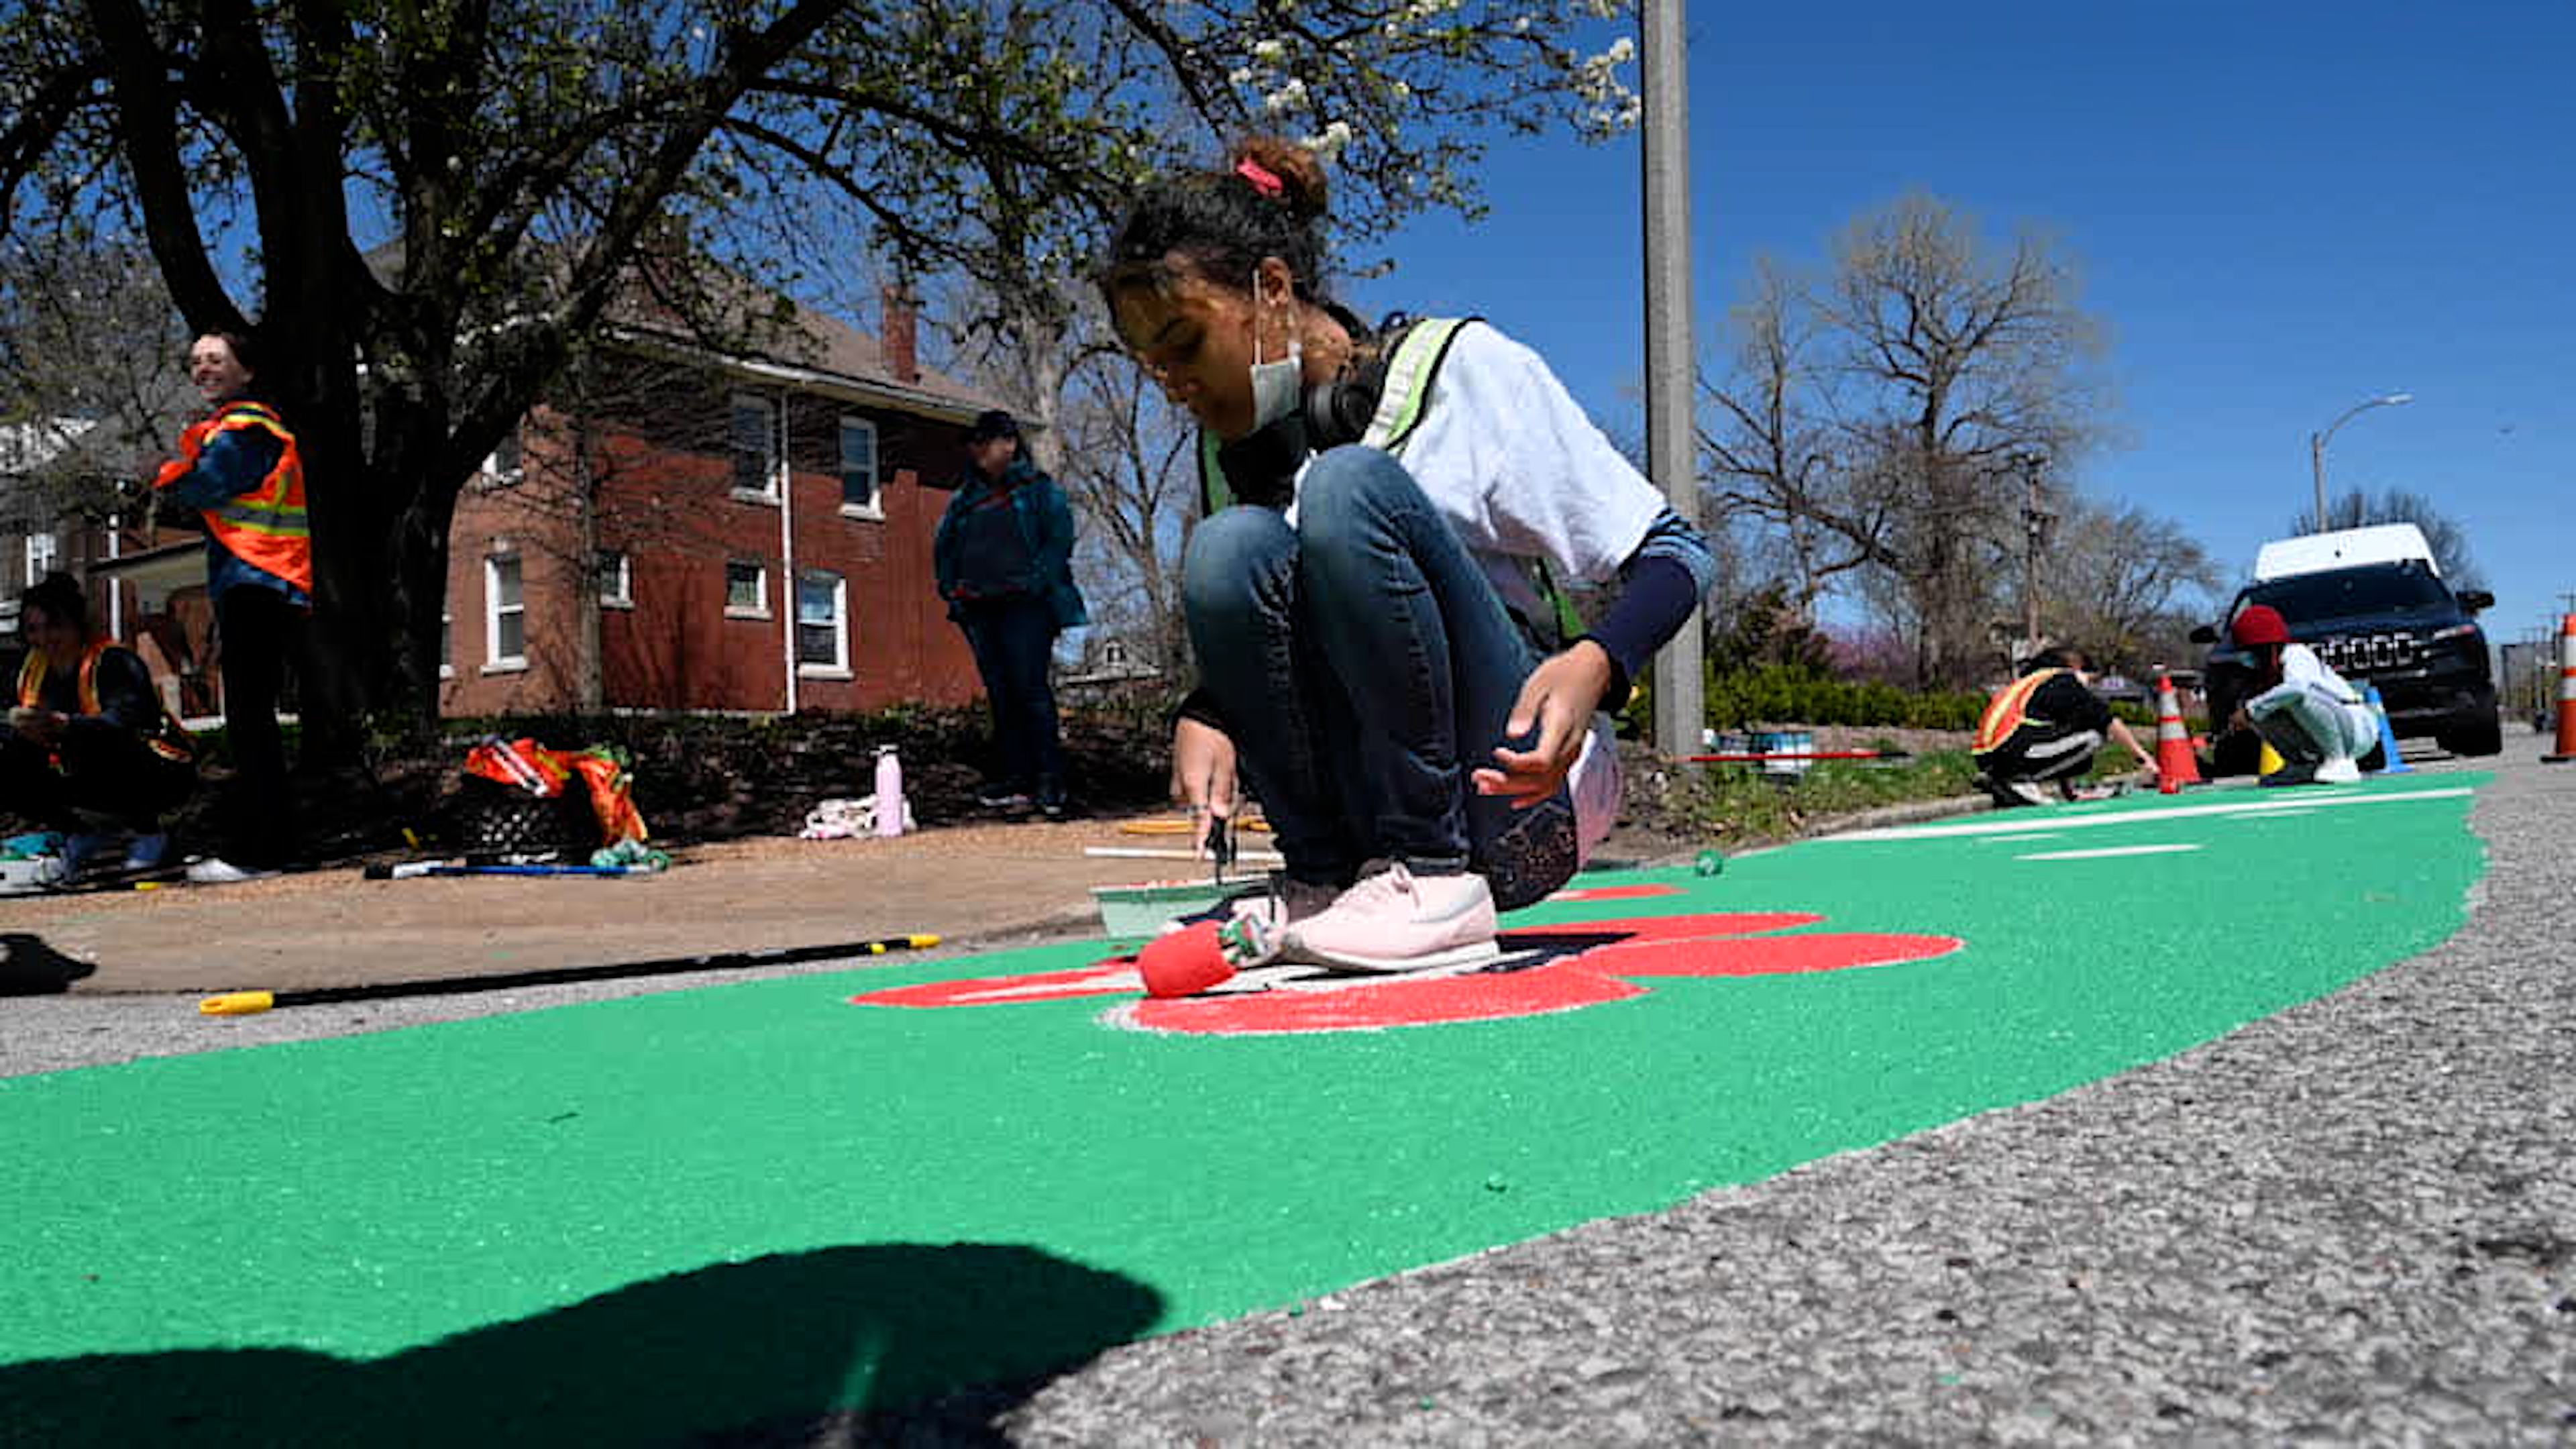 Open St. Louis ArtWorks youths, with help from Washington University graduate students, created colorful designs to paint on four Hamilton Avenue intersections.